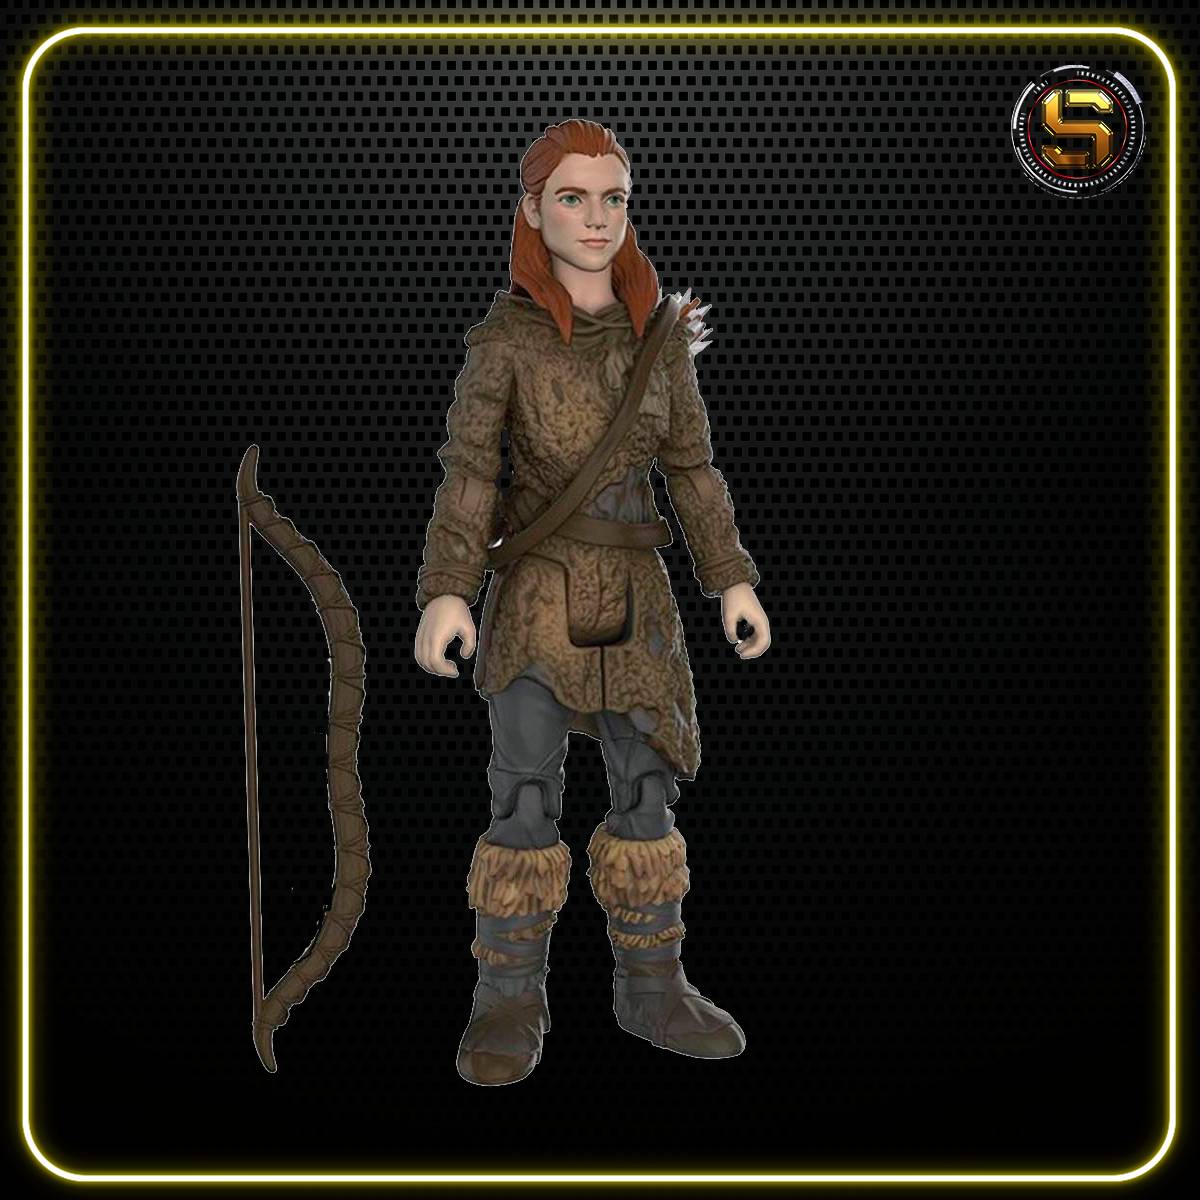 FUNKO ACTION FIGURE TV GAME OF THRONES YGRITTE